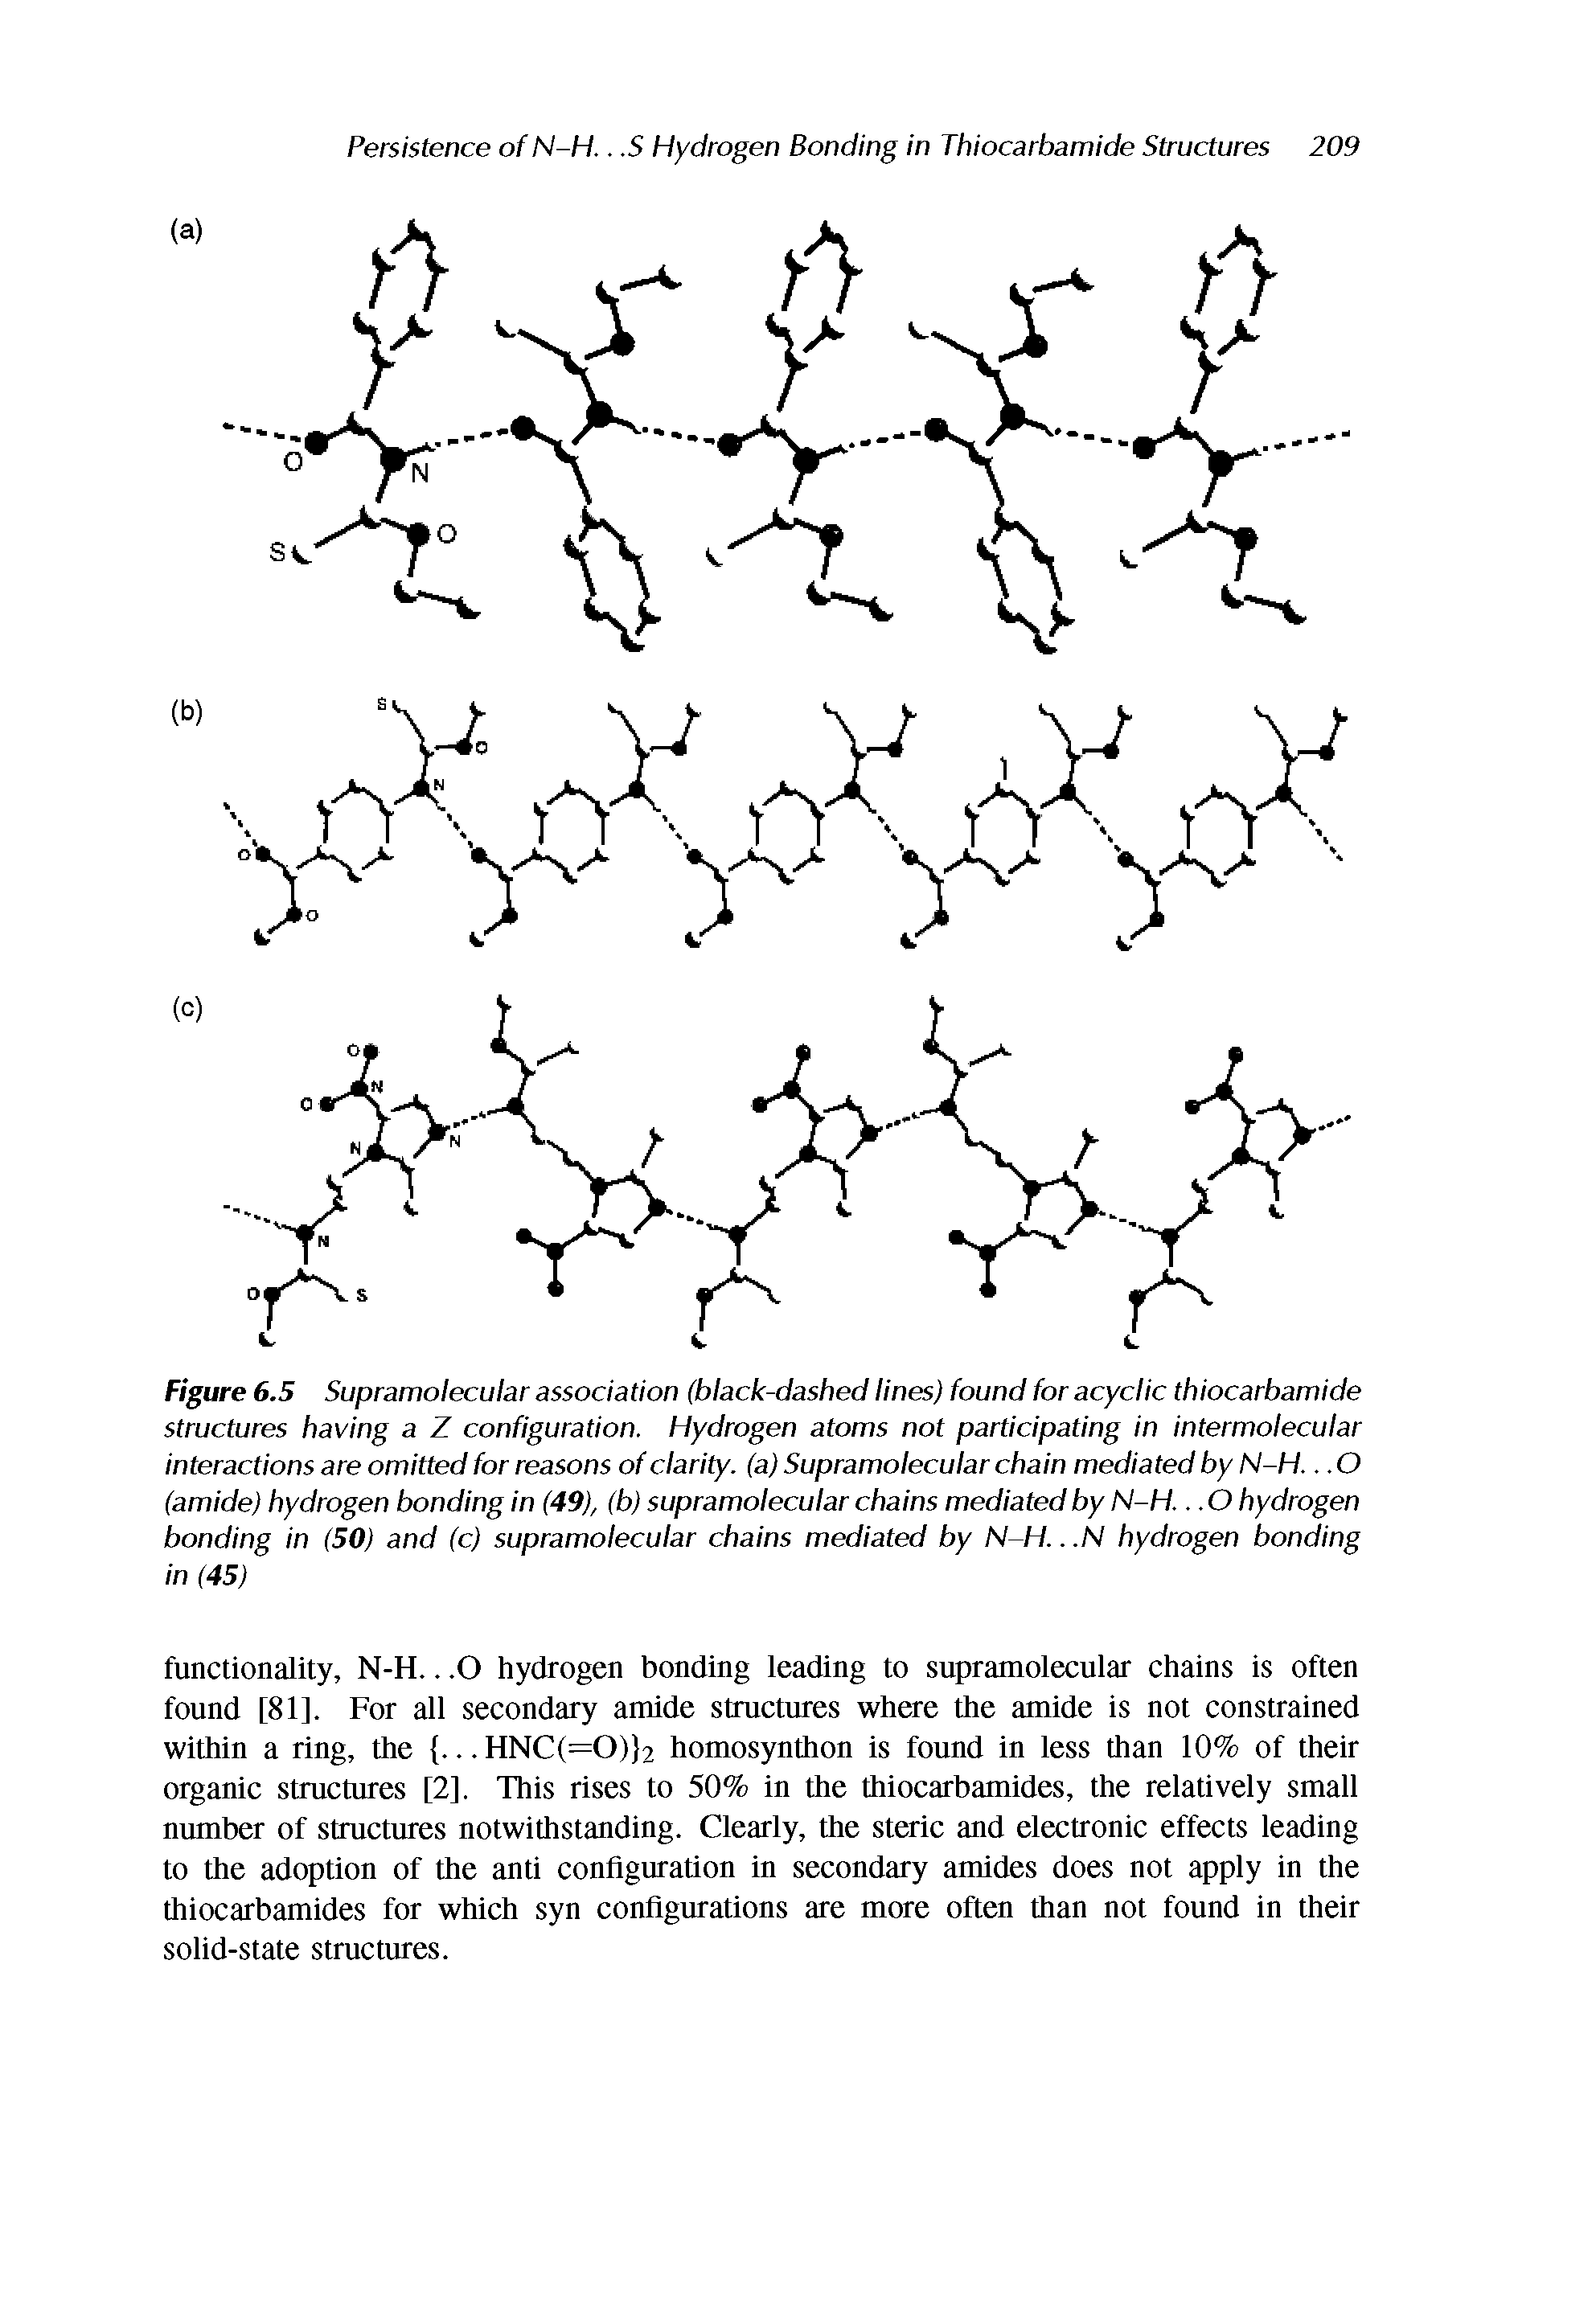 Figure 6.5 Supramolecular association (black-dashed lines) found for acyclic thiocarbamide structures having a Z configuration. Hydrogen atoms not participating in intermolecular interactions are omitted for reasons of clarity, (a) Supramolecular chain mediated by N-H... O (amide) hydrogen bonding in (49), (b) supramolecular chains mediated by N-H... O hydrogen bonding in (50) and (c) supramolecular chains mediated by N-H... N hydrogen bonding in (45)...